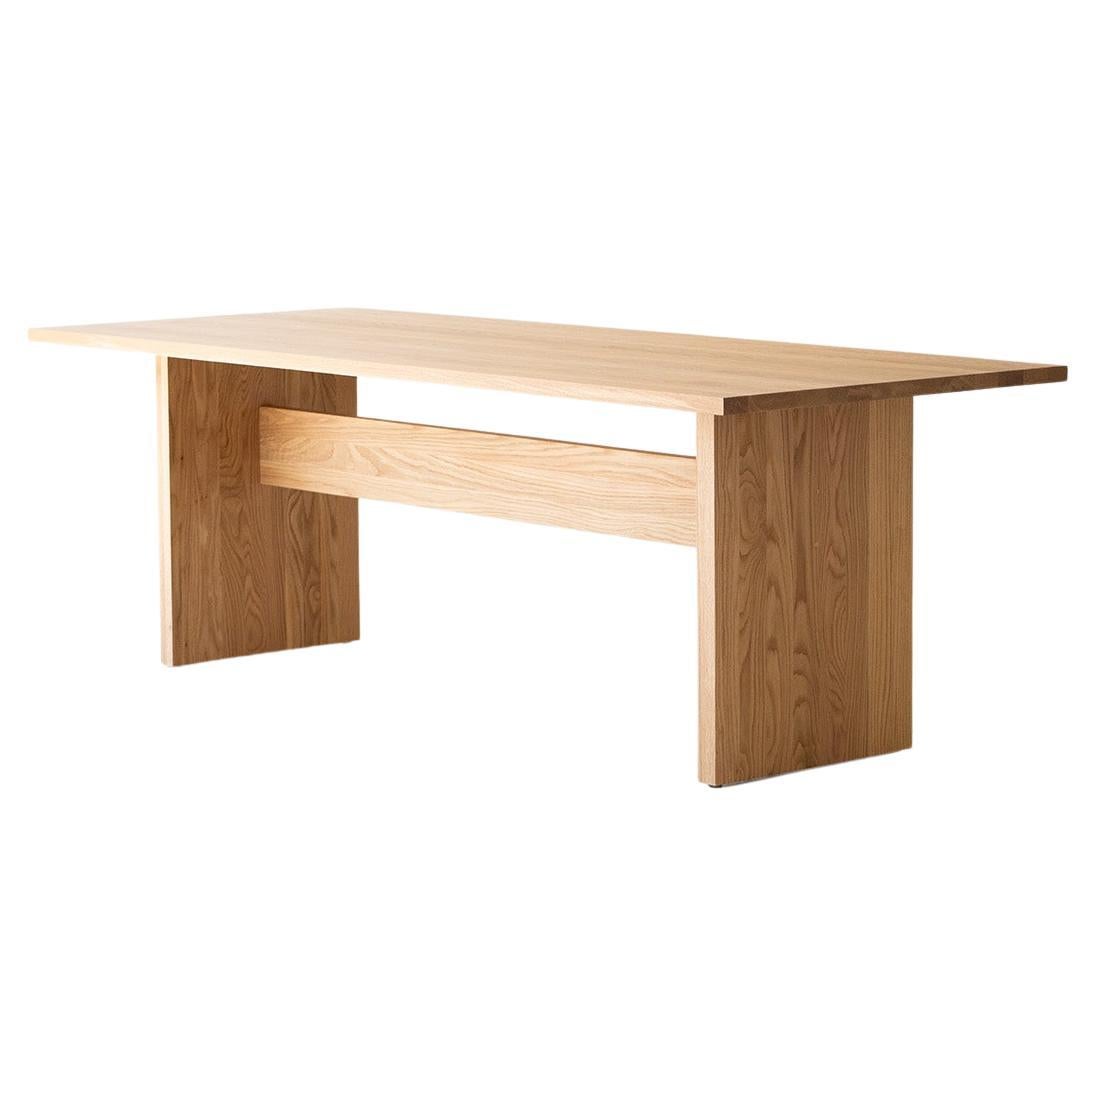 White Oak Dining Table, The Toko